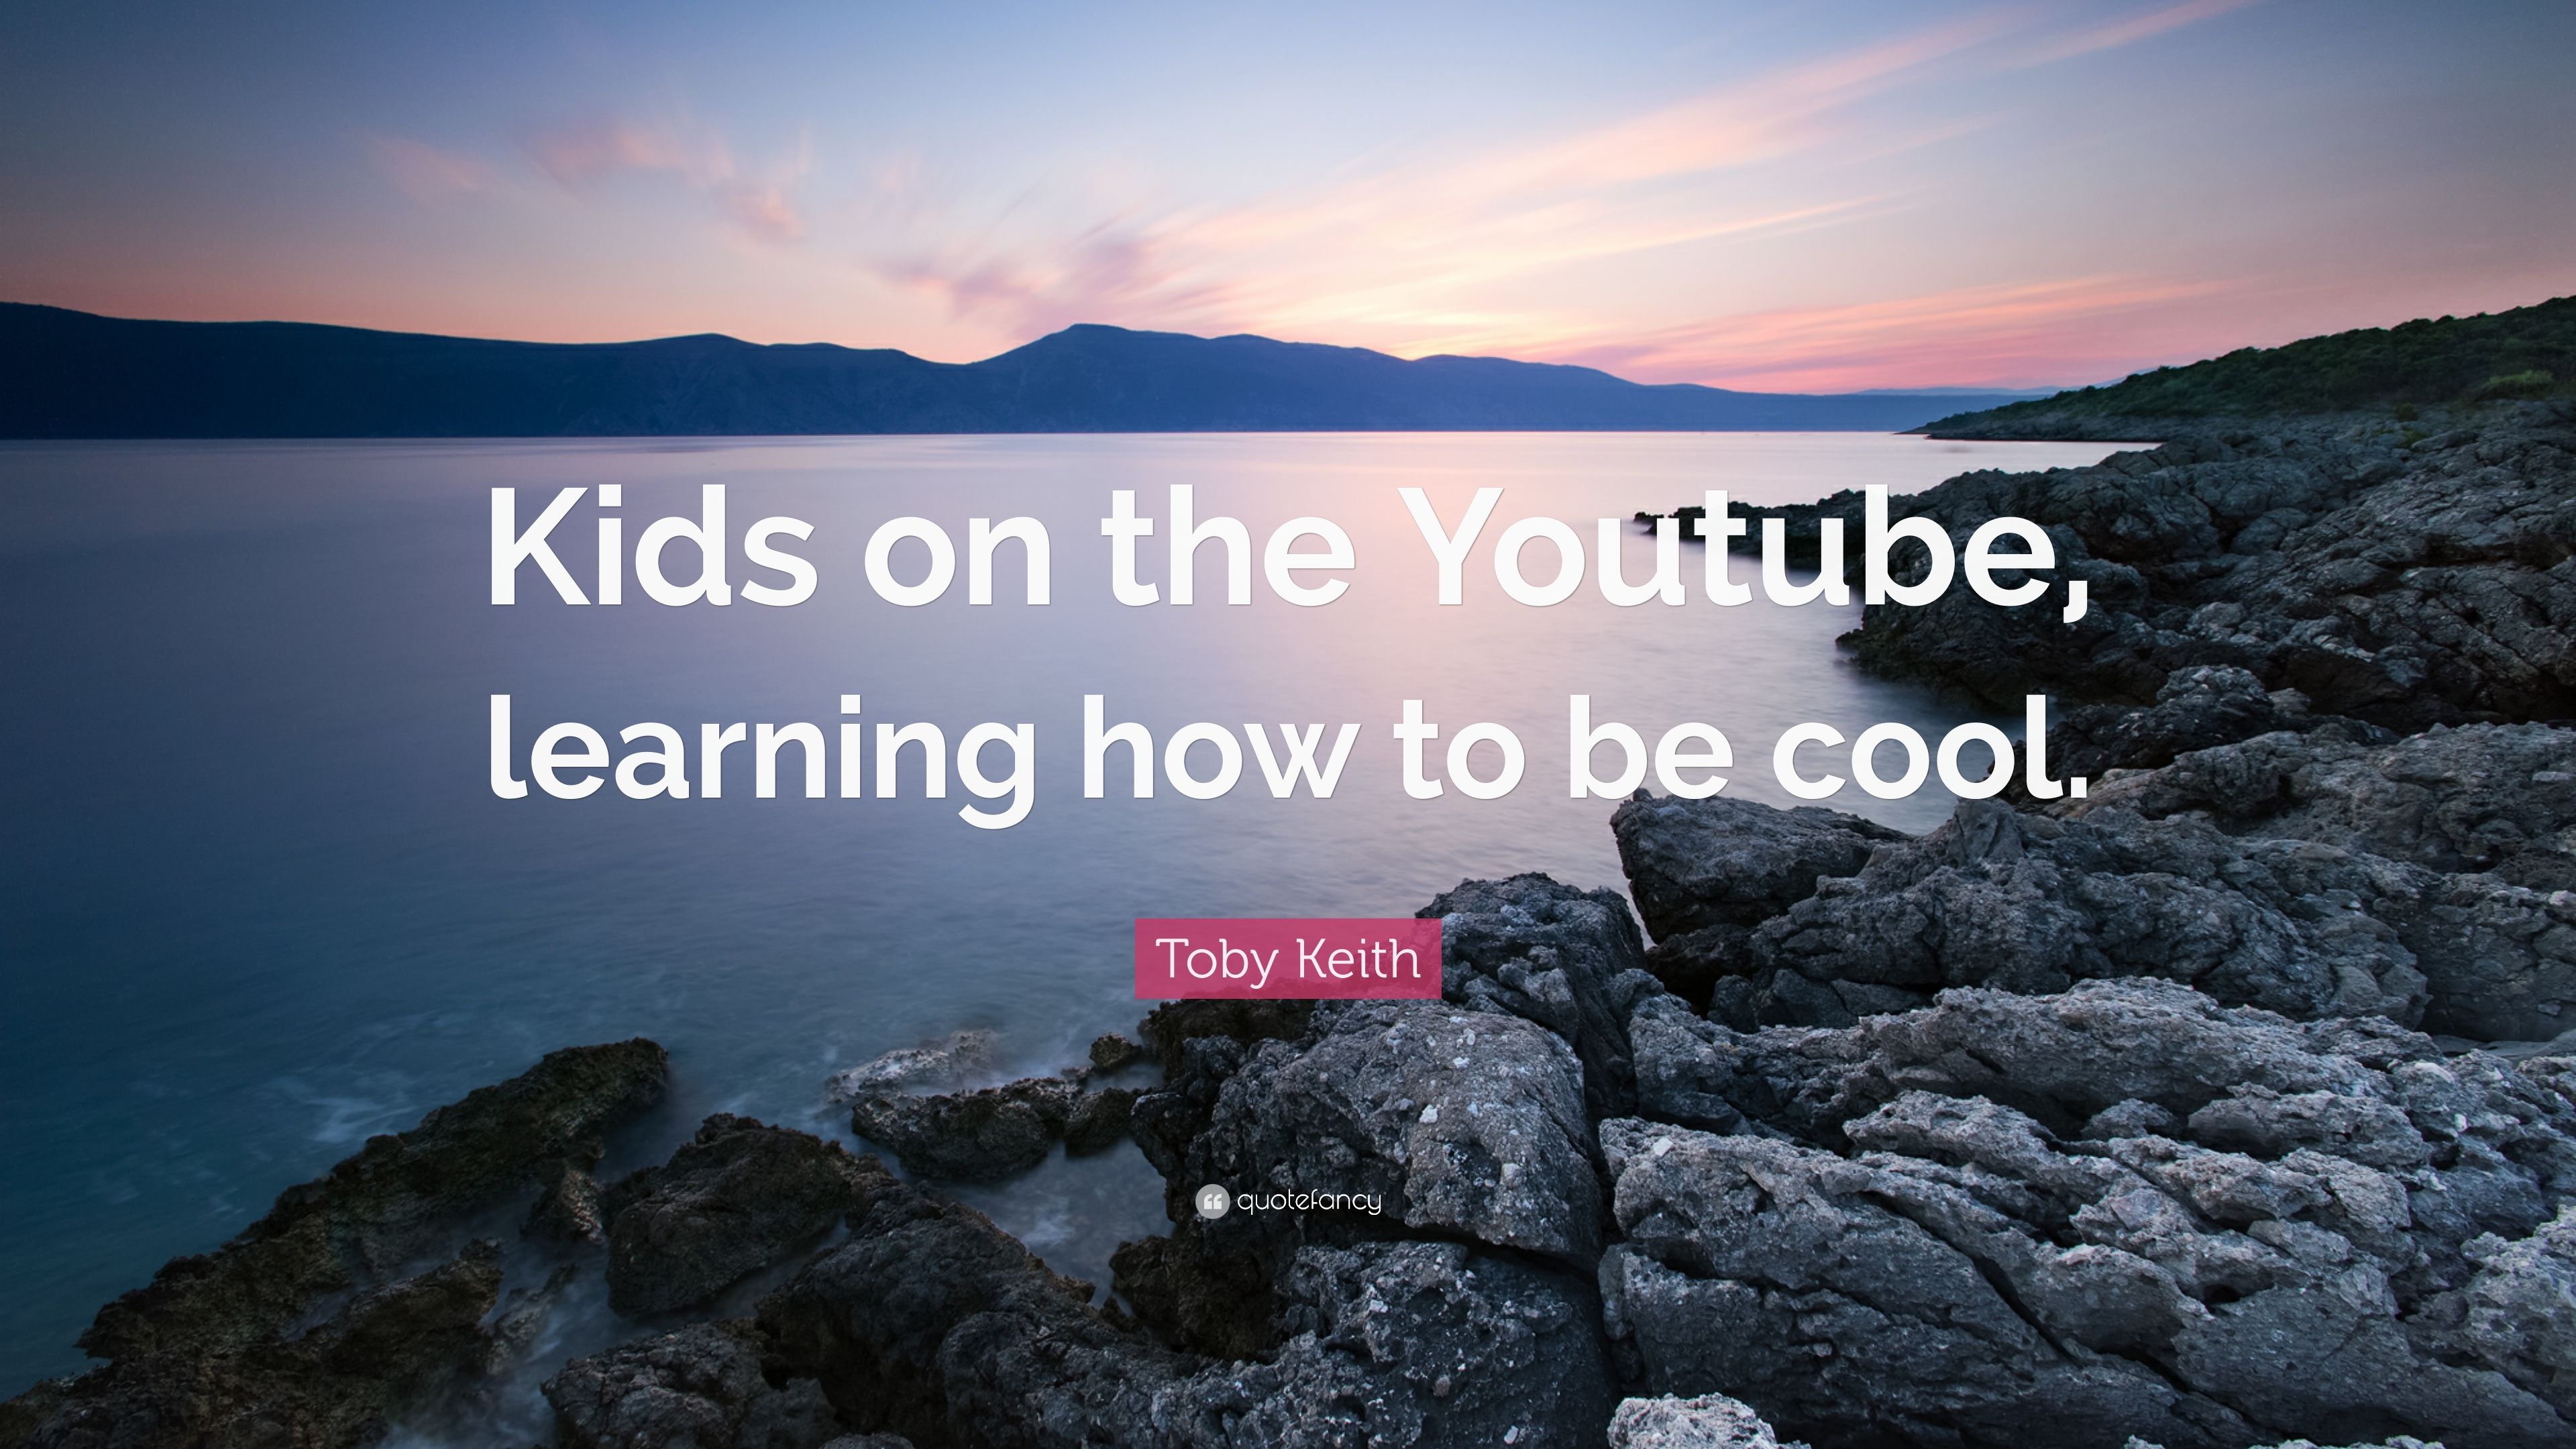 Toby Keith Quote: “Kids on the Youtube, learning how to be cool.” (7 wallpaper)